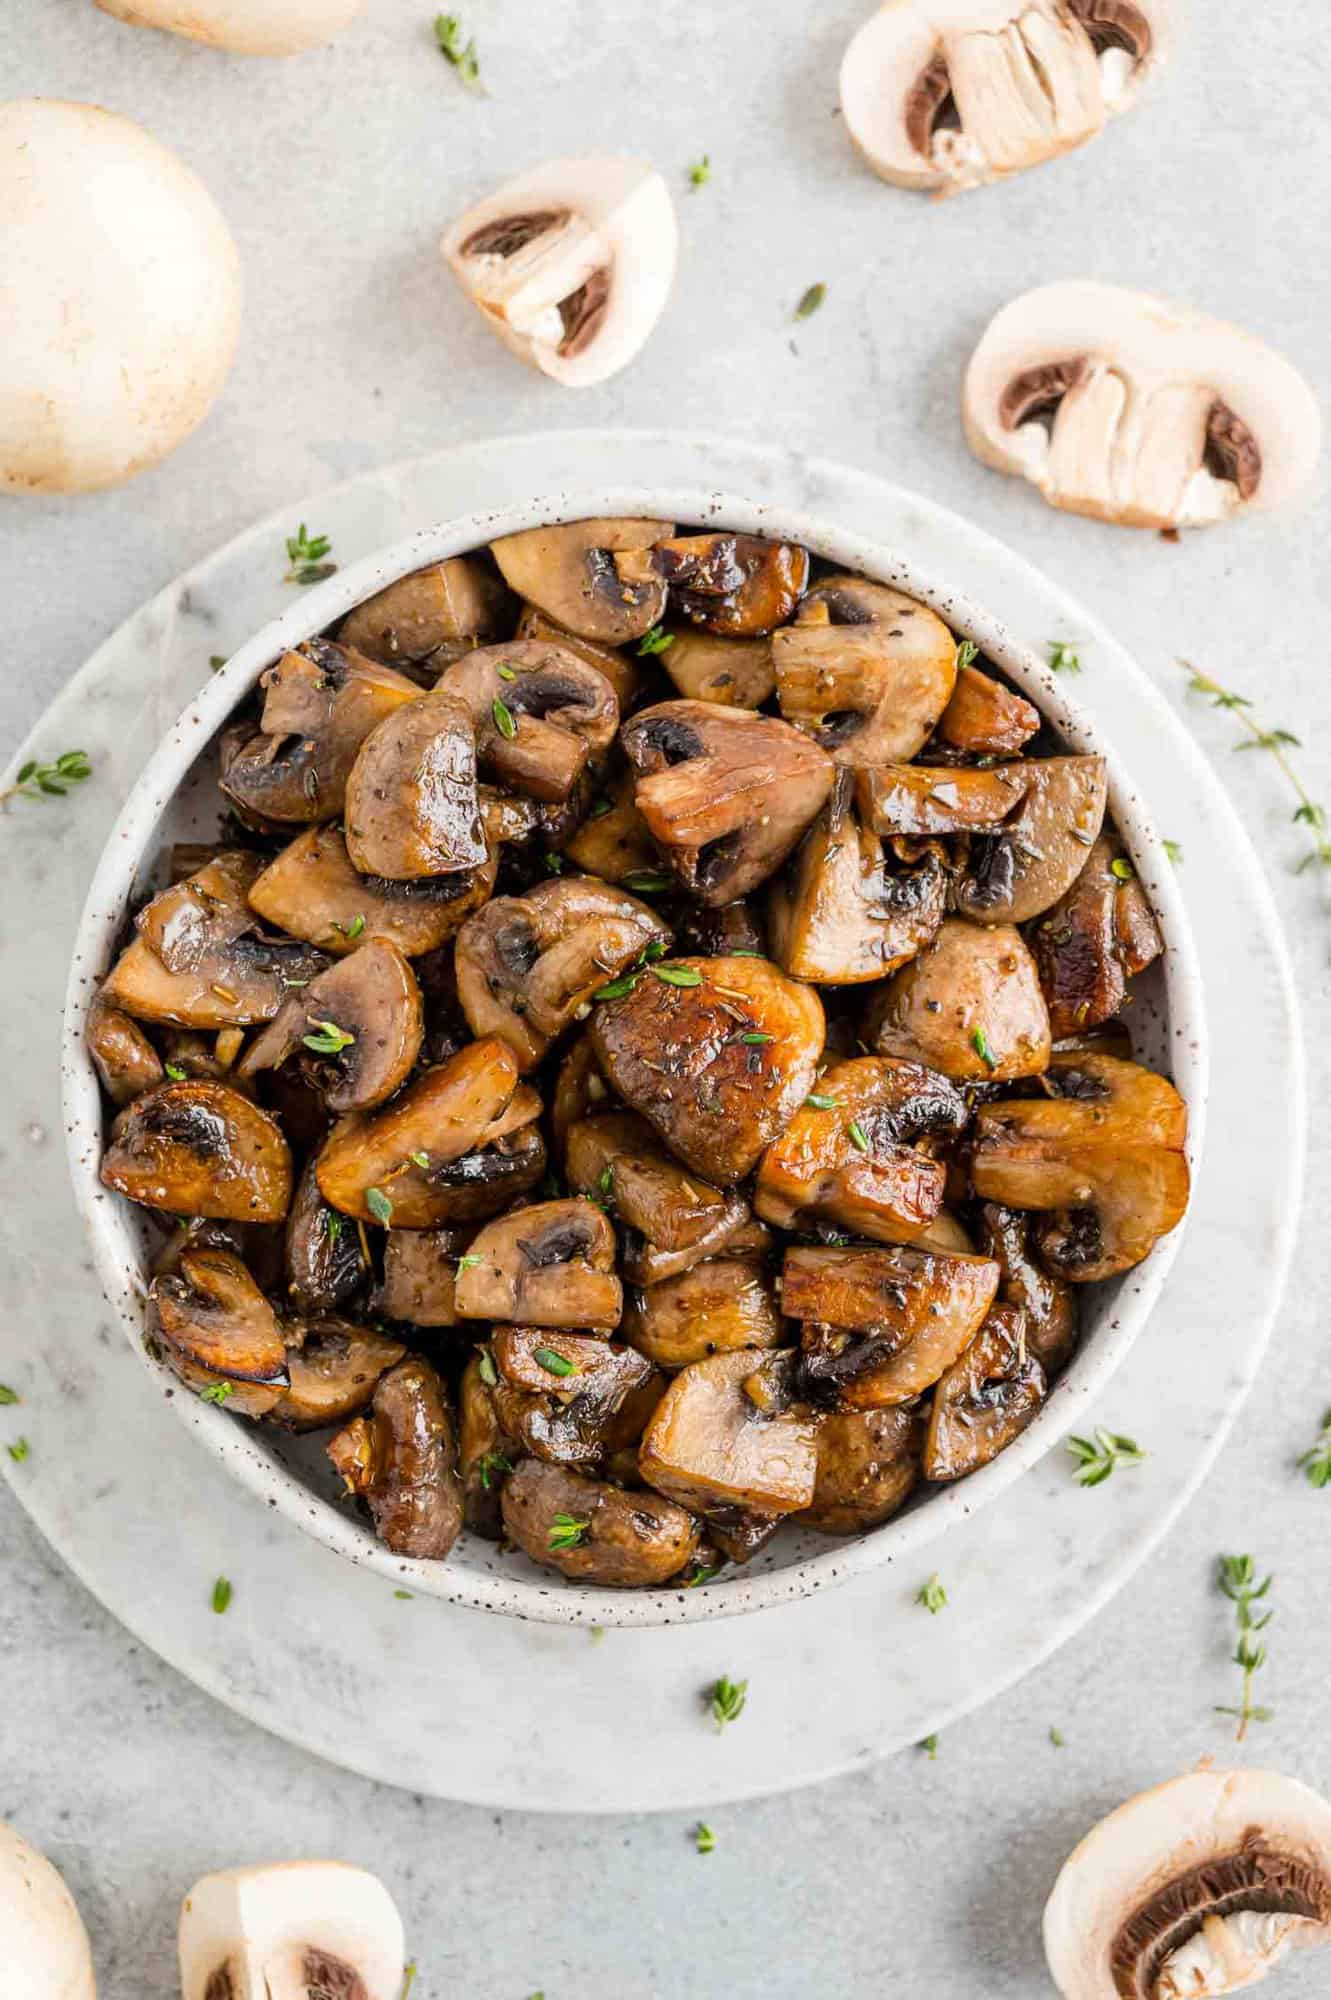 Mushrooms in a large serving bowl.